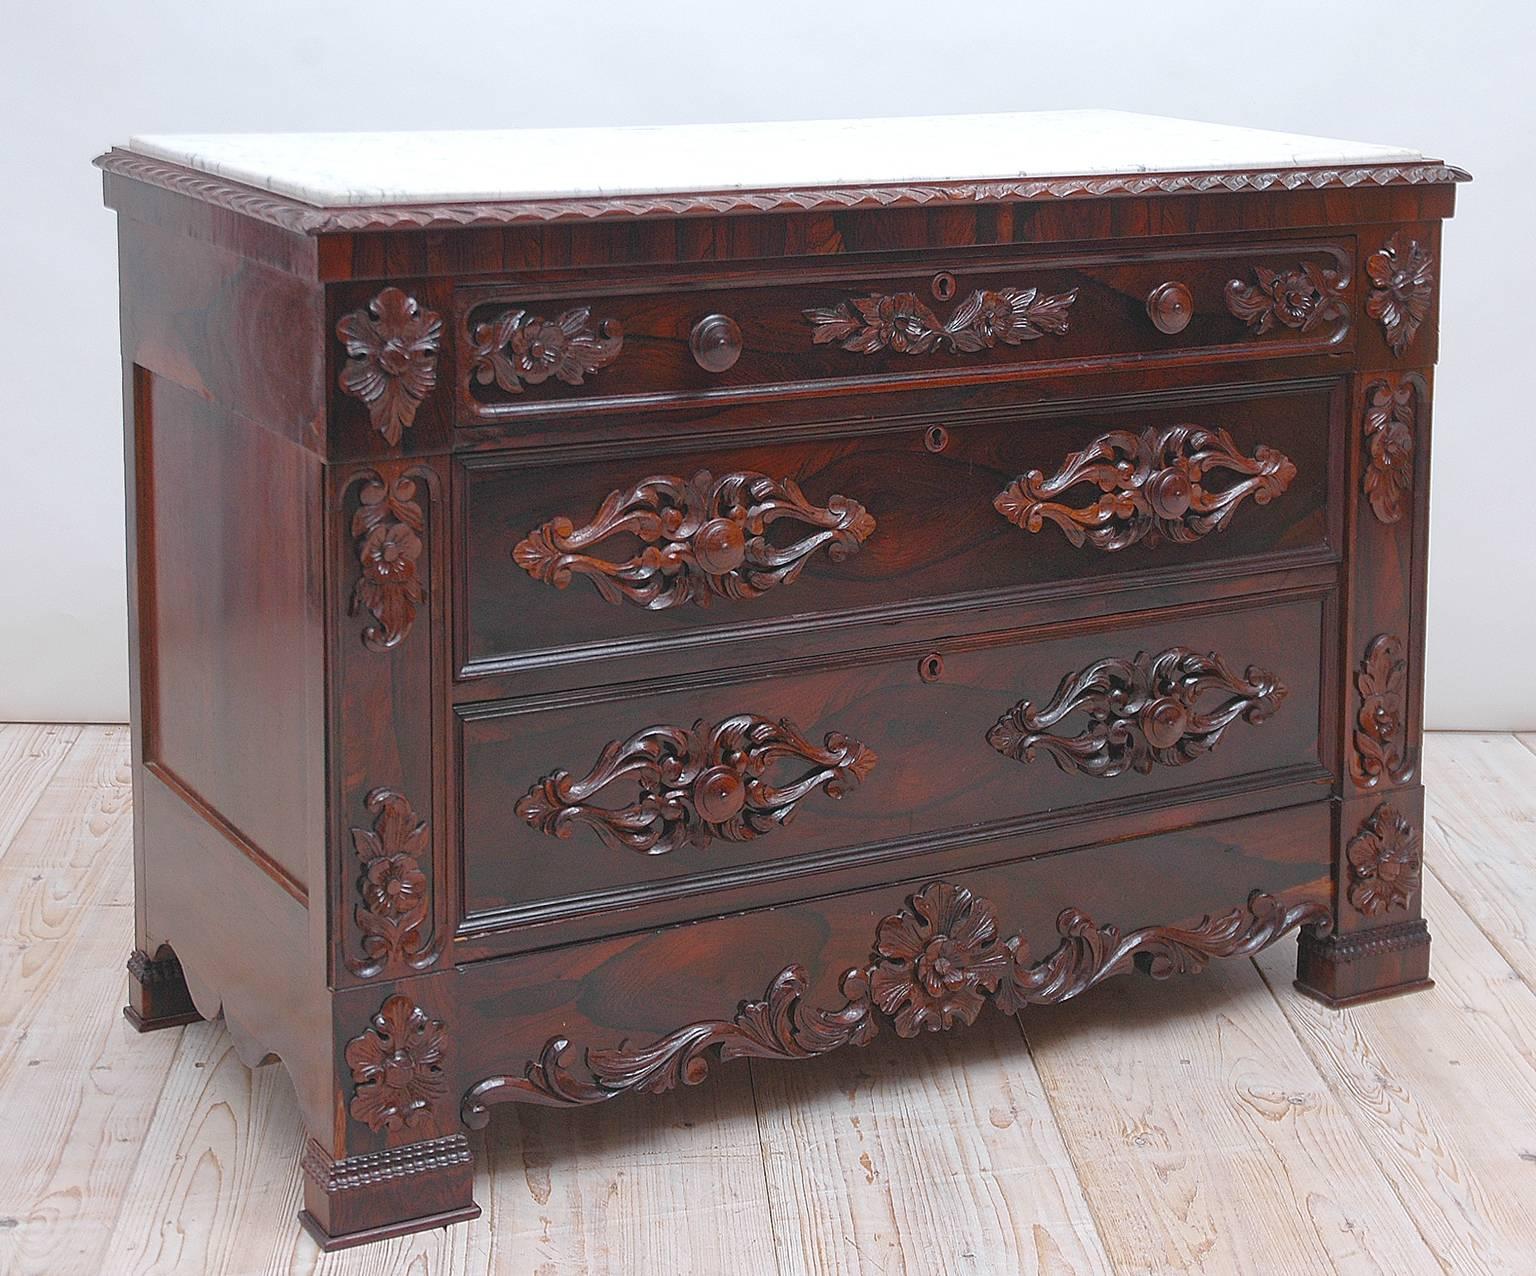 A beautifully-carved & highly decorated Victorian chest of drawers in prized rosewood with original statuary marble. Features original and complete carved rosewood appliqués and knobs, with gadrooned edge and inset marble top. American, circa